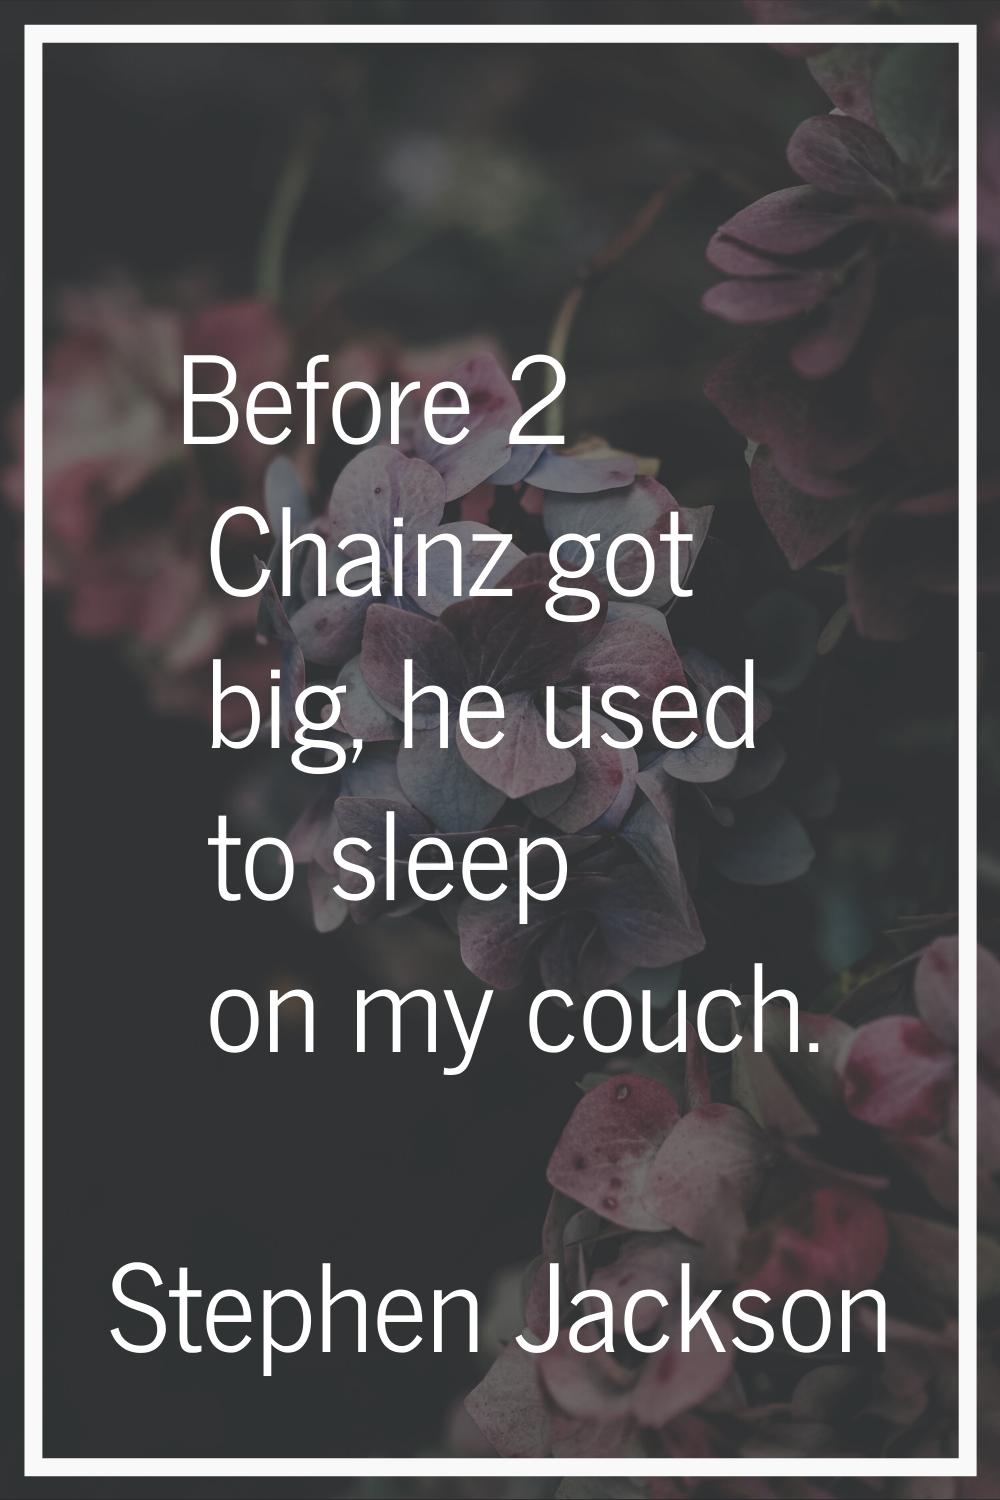 Before 2 Chainz got big, he used to sleep on my couch.